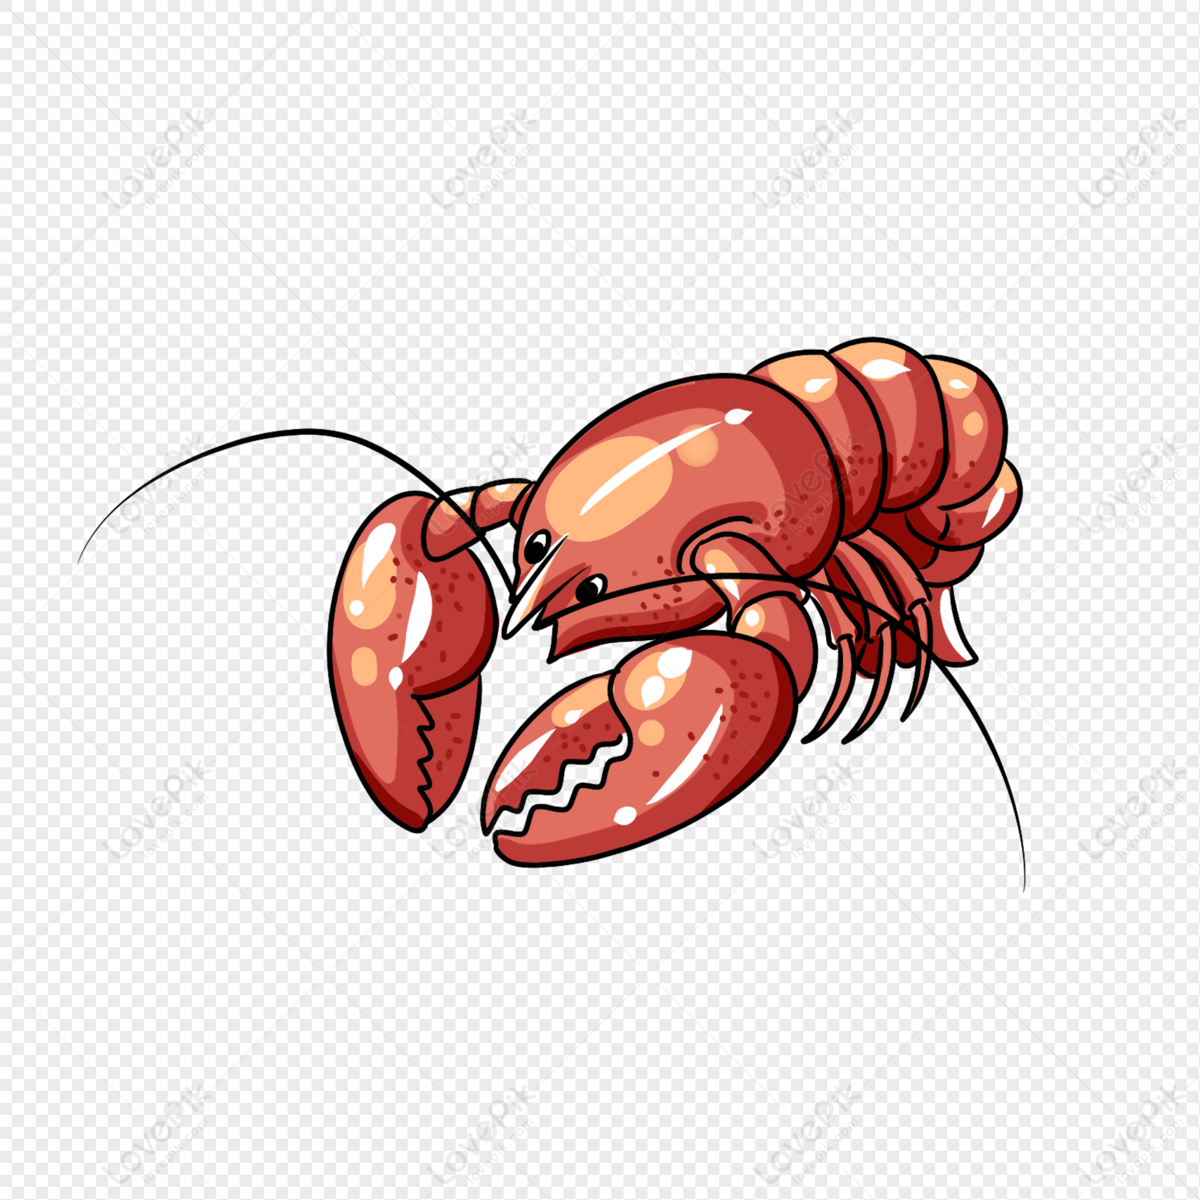 Crayfish PNG Hd Transparent Image And Clipart Image For Free Download -  Lovepik | 401740014